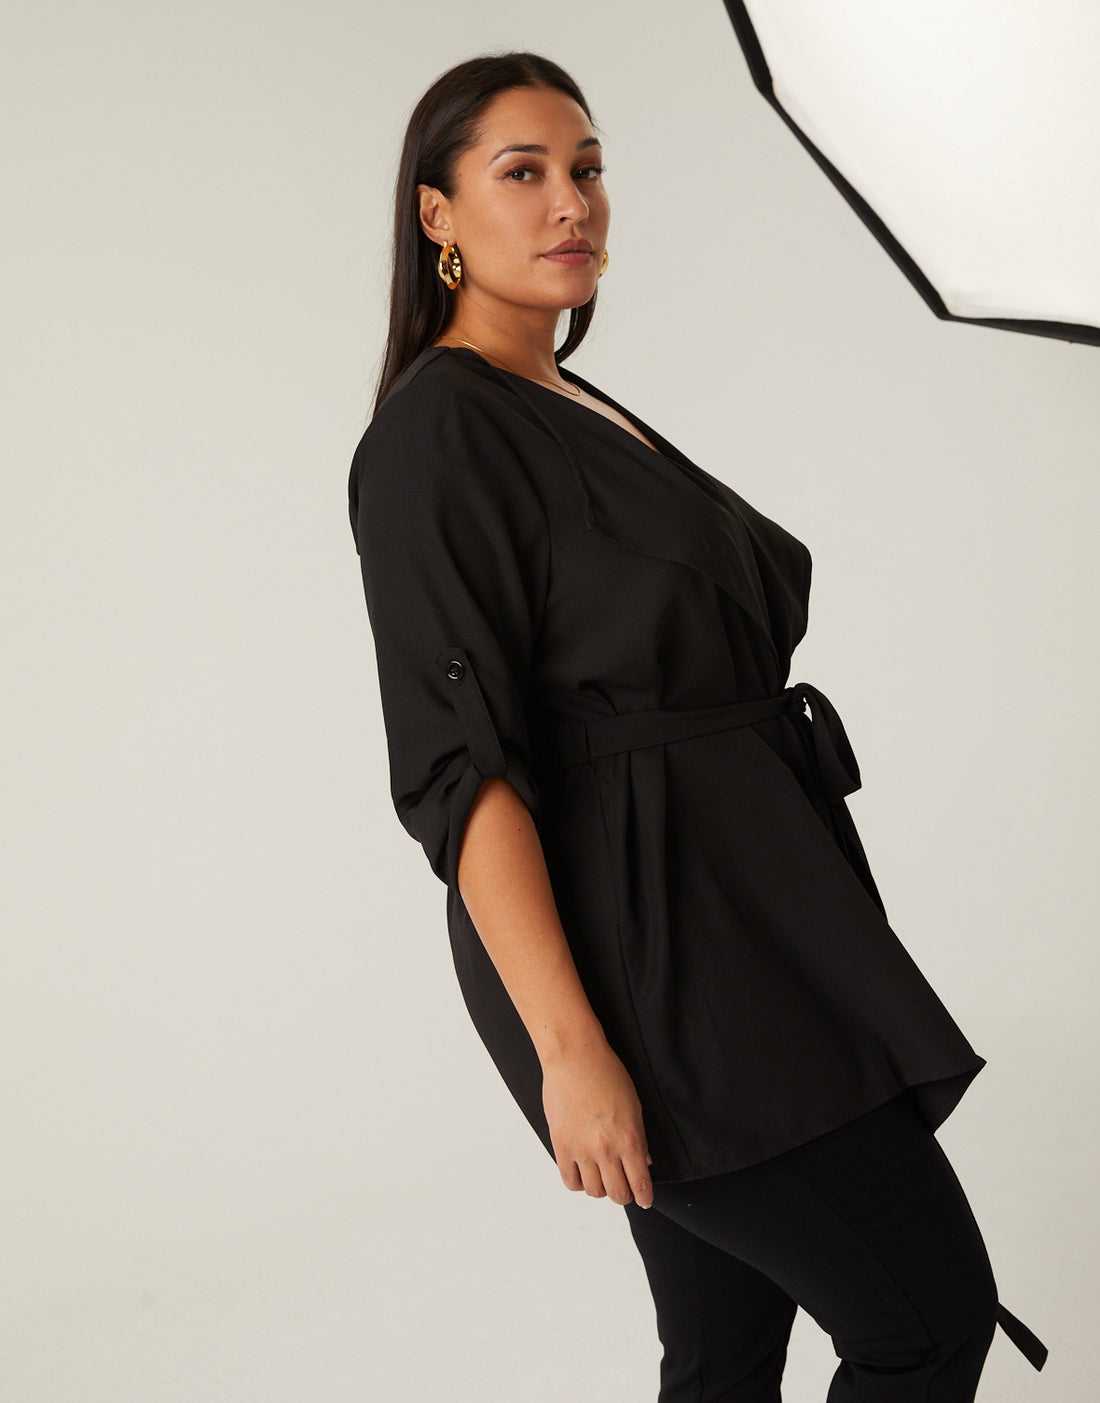 Curve Crepe Tied Cardigan Plus Size Outerwear -2020AVE